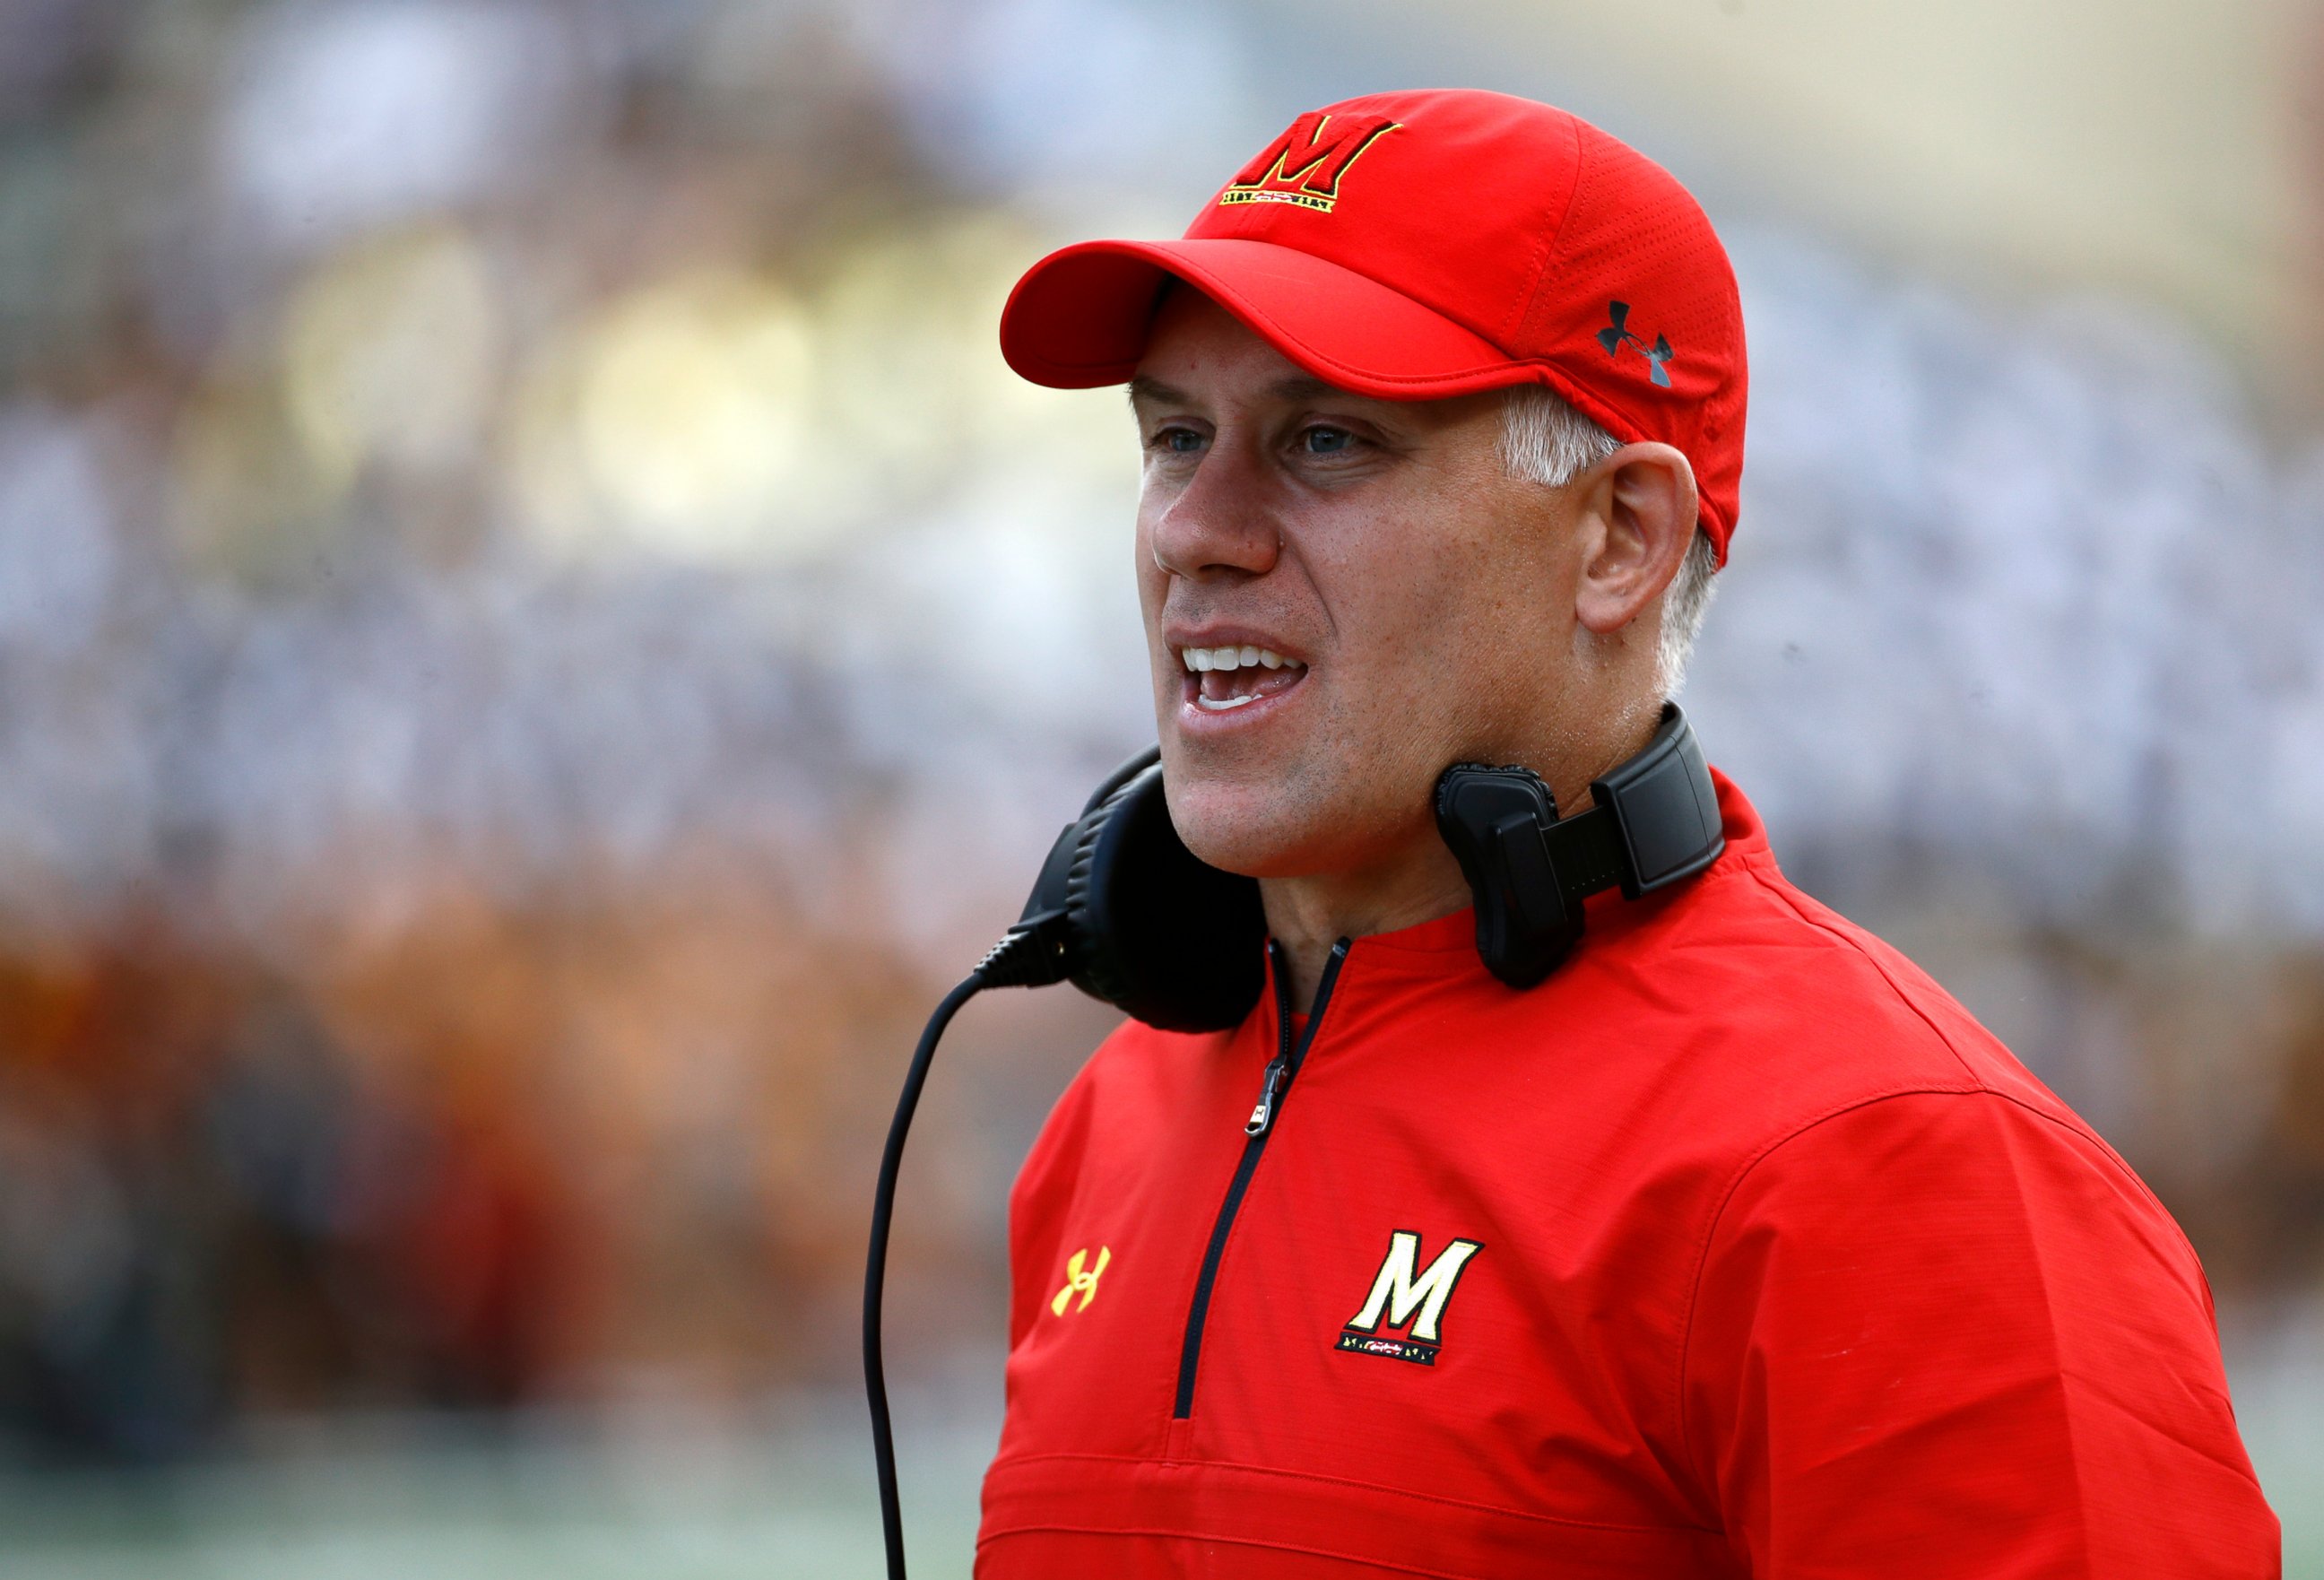 PHOTO: In this Saturday, Sept. 9, 2017, file photo, Maryland head coach DJ Durkin stands on the sideline during an NCAA college football game against Towson in College Park, Md.